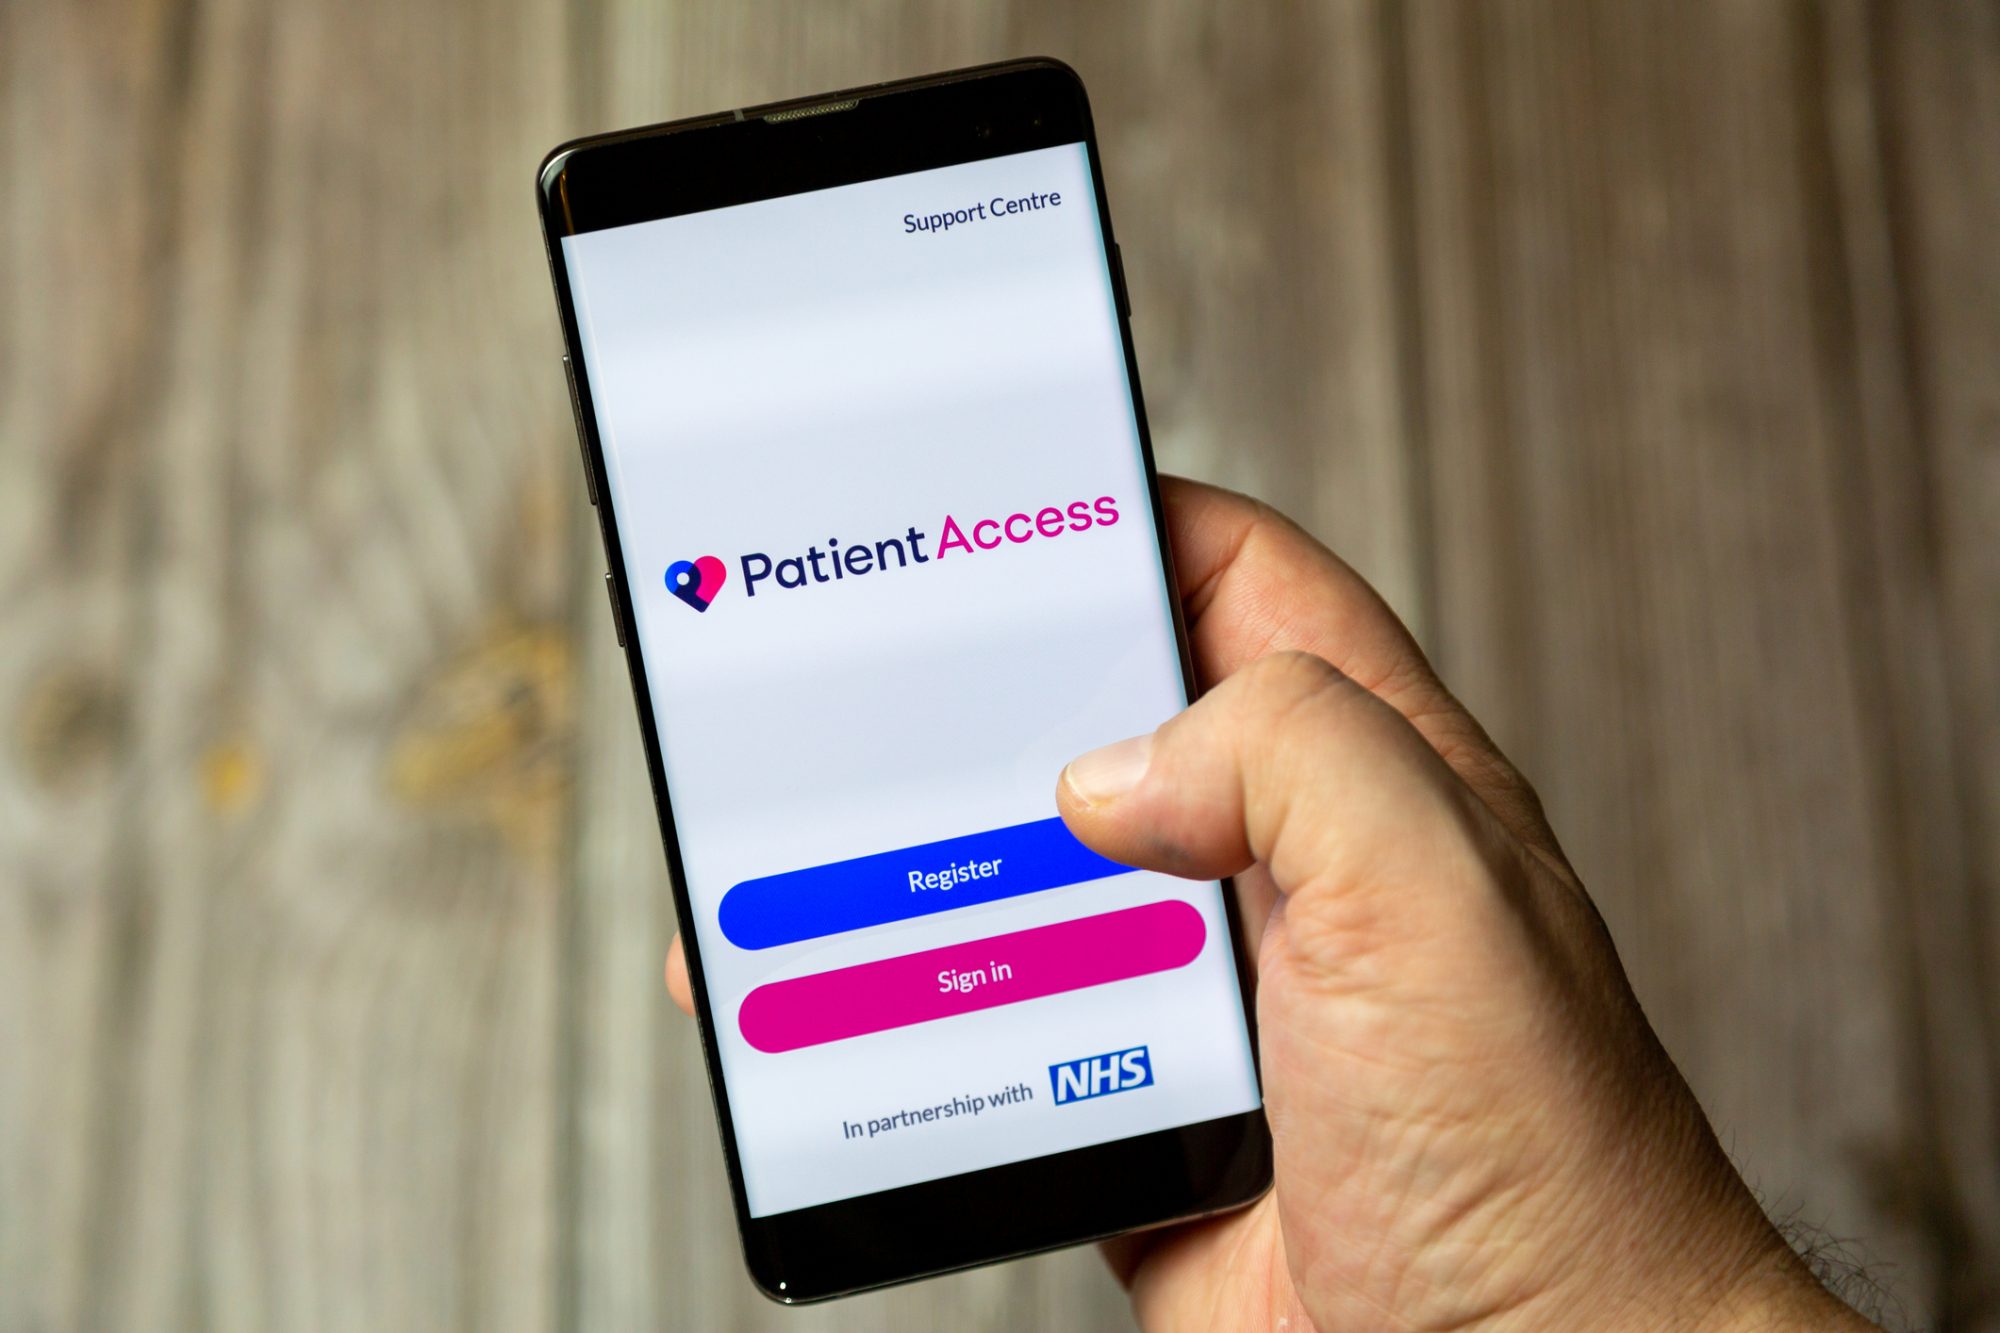 A mobile phone or cell phone being held by a hand with the Patient Access app by NHS open on screen 